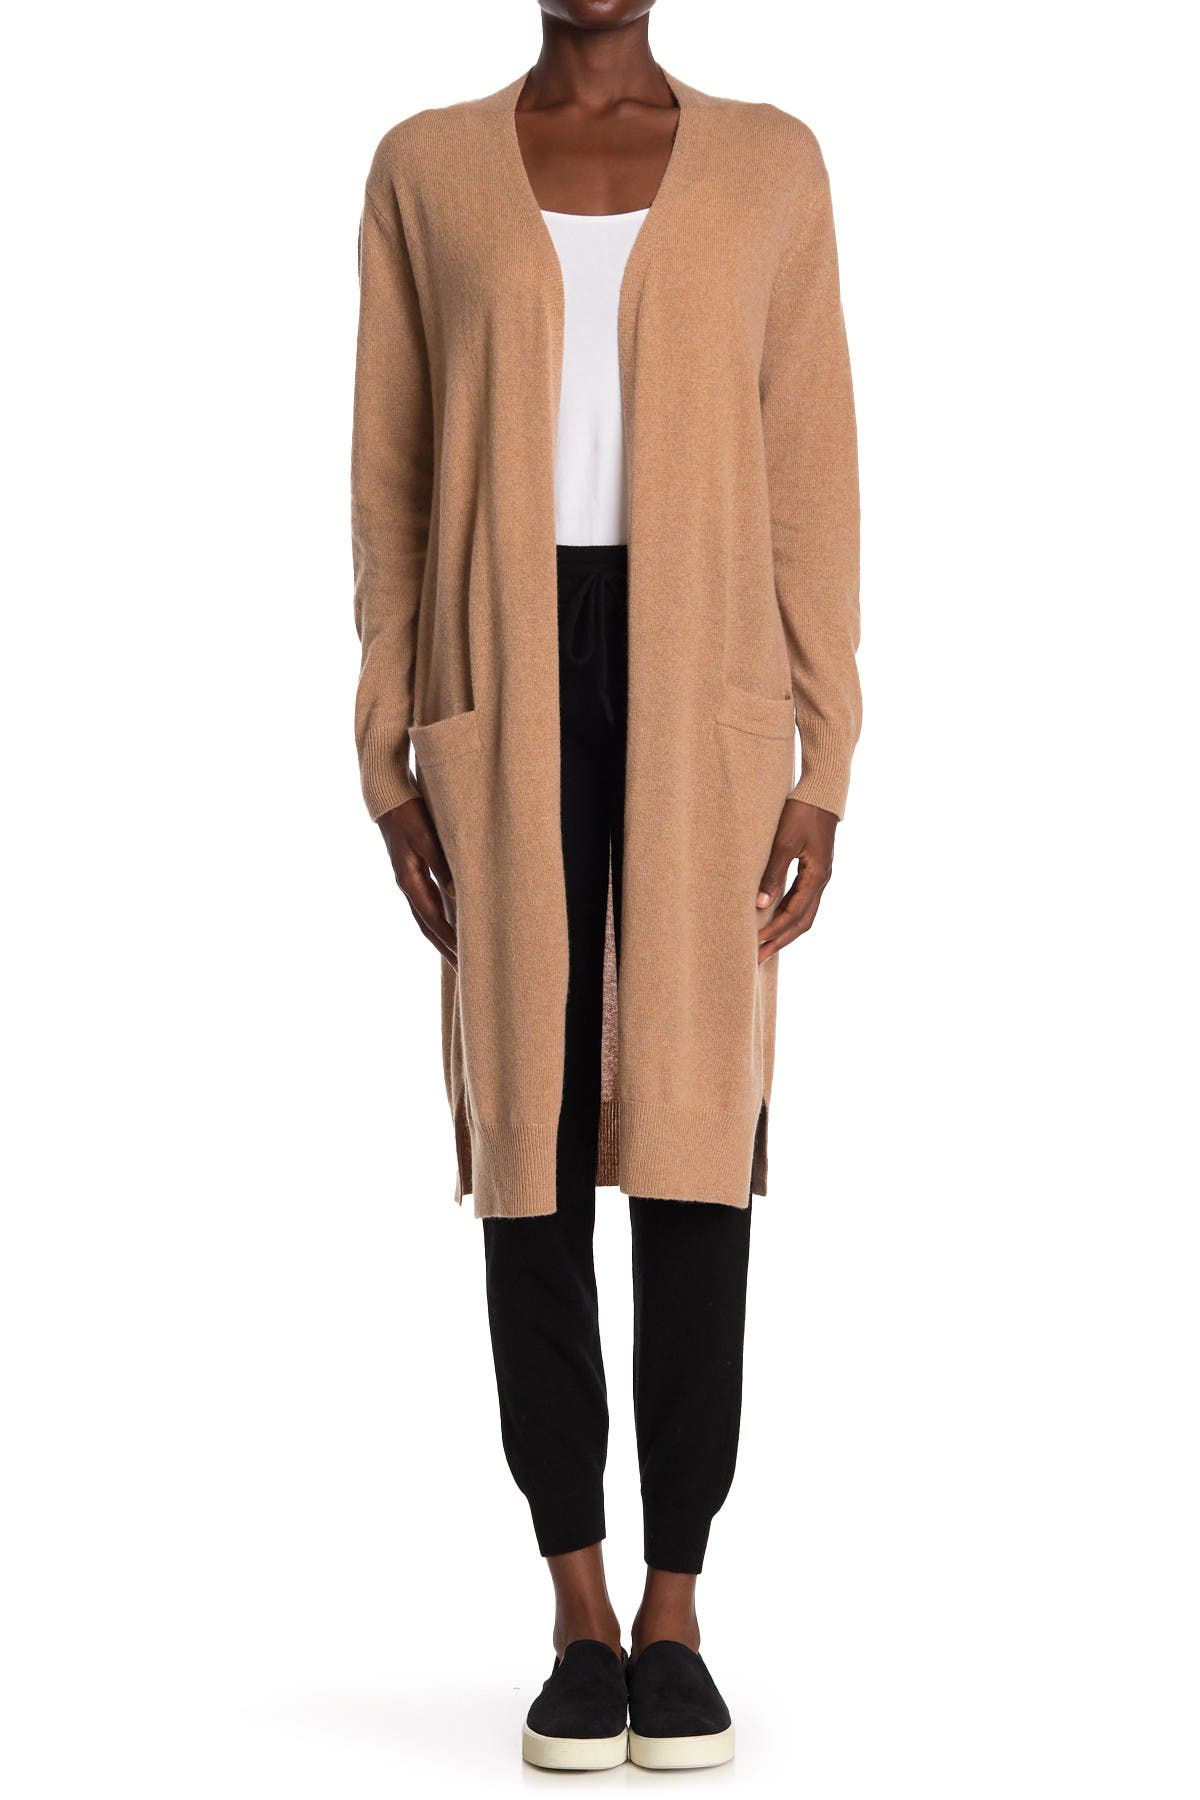 Amicale Cashmere Open Front Duster In Dark Beige